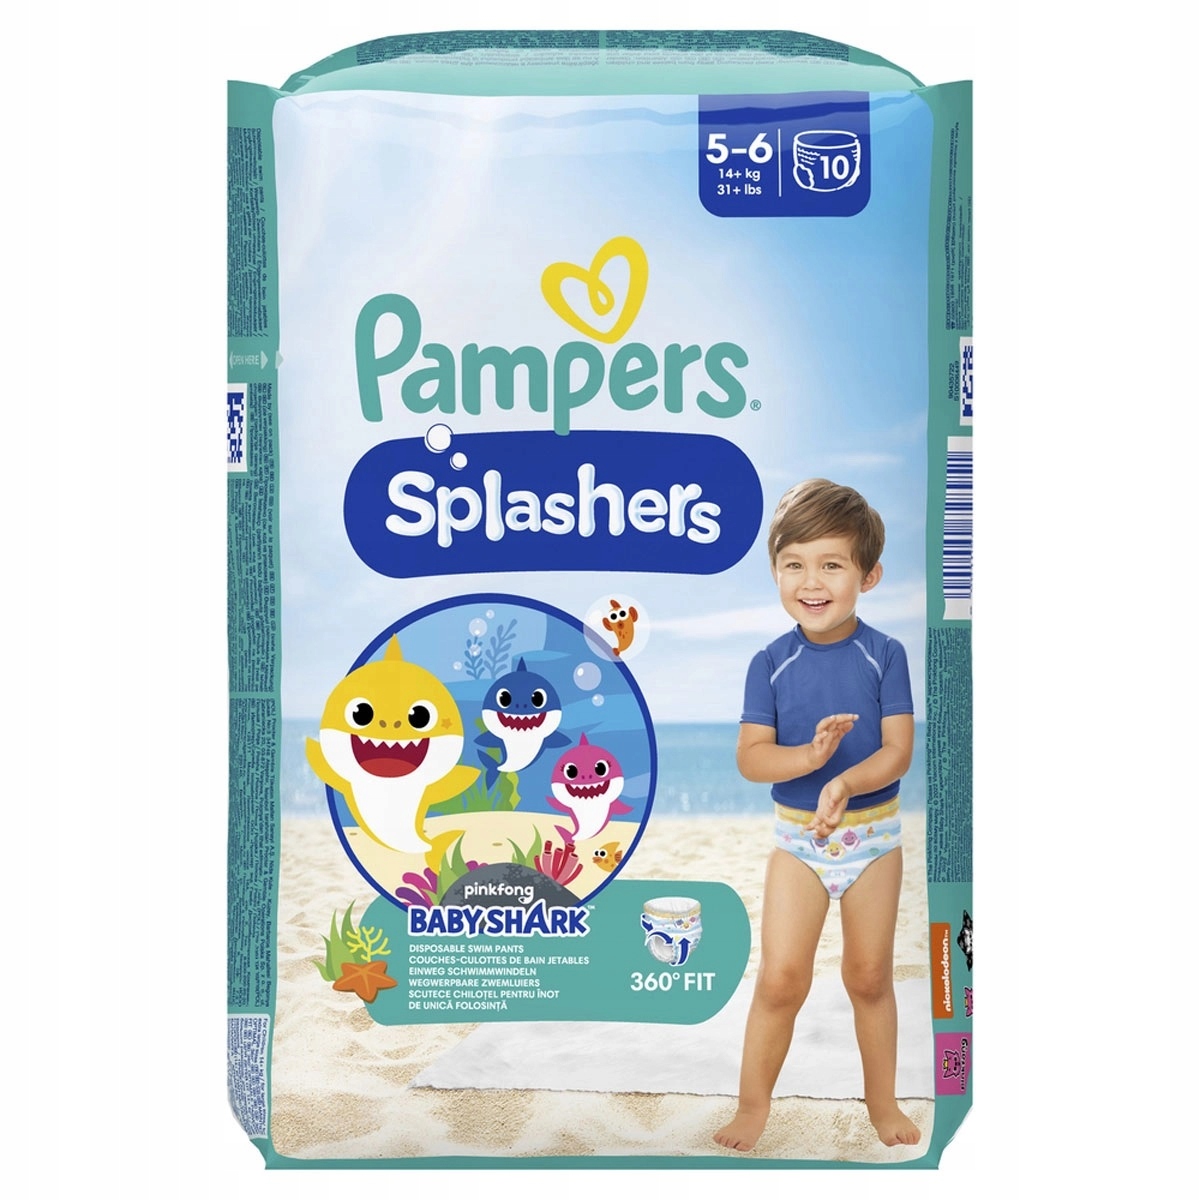 pampers activ 3